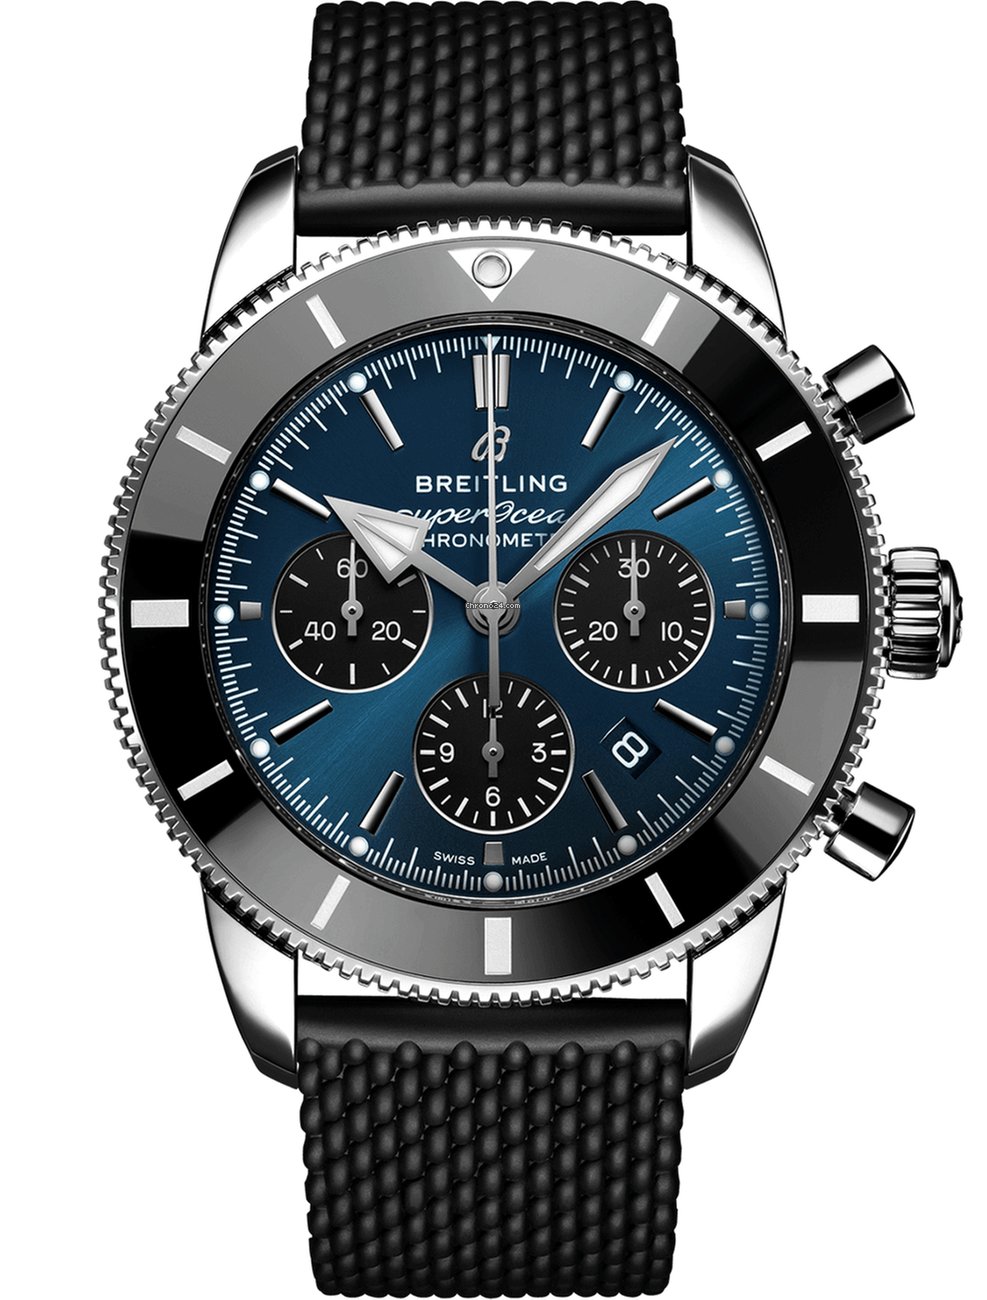 Breitling Superocean Heritage Chronograph 46 Automatic Self Wind Chronograph, Date, Hour, Minute, Second Mens watch A13312121C1S1